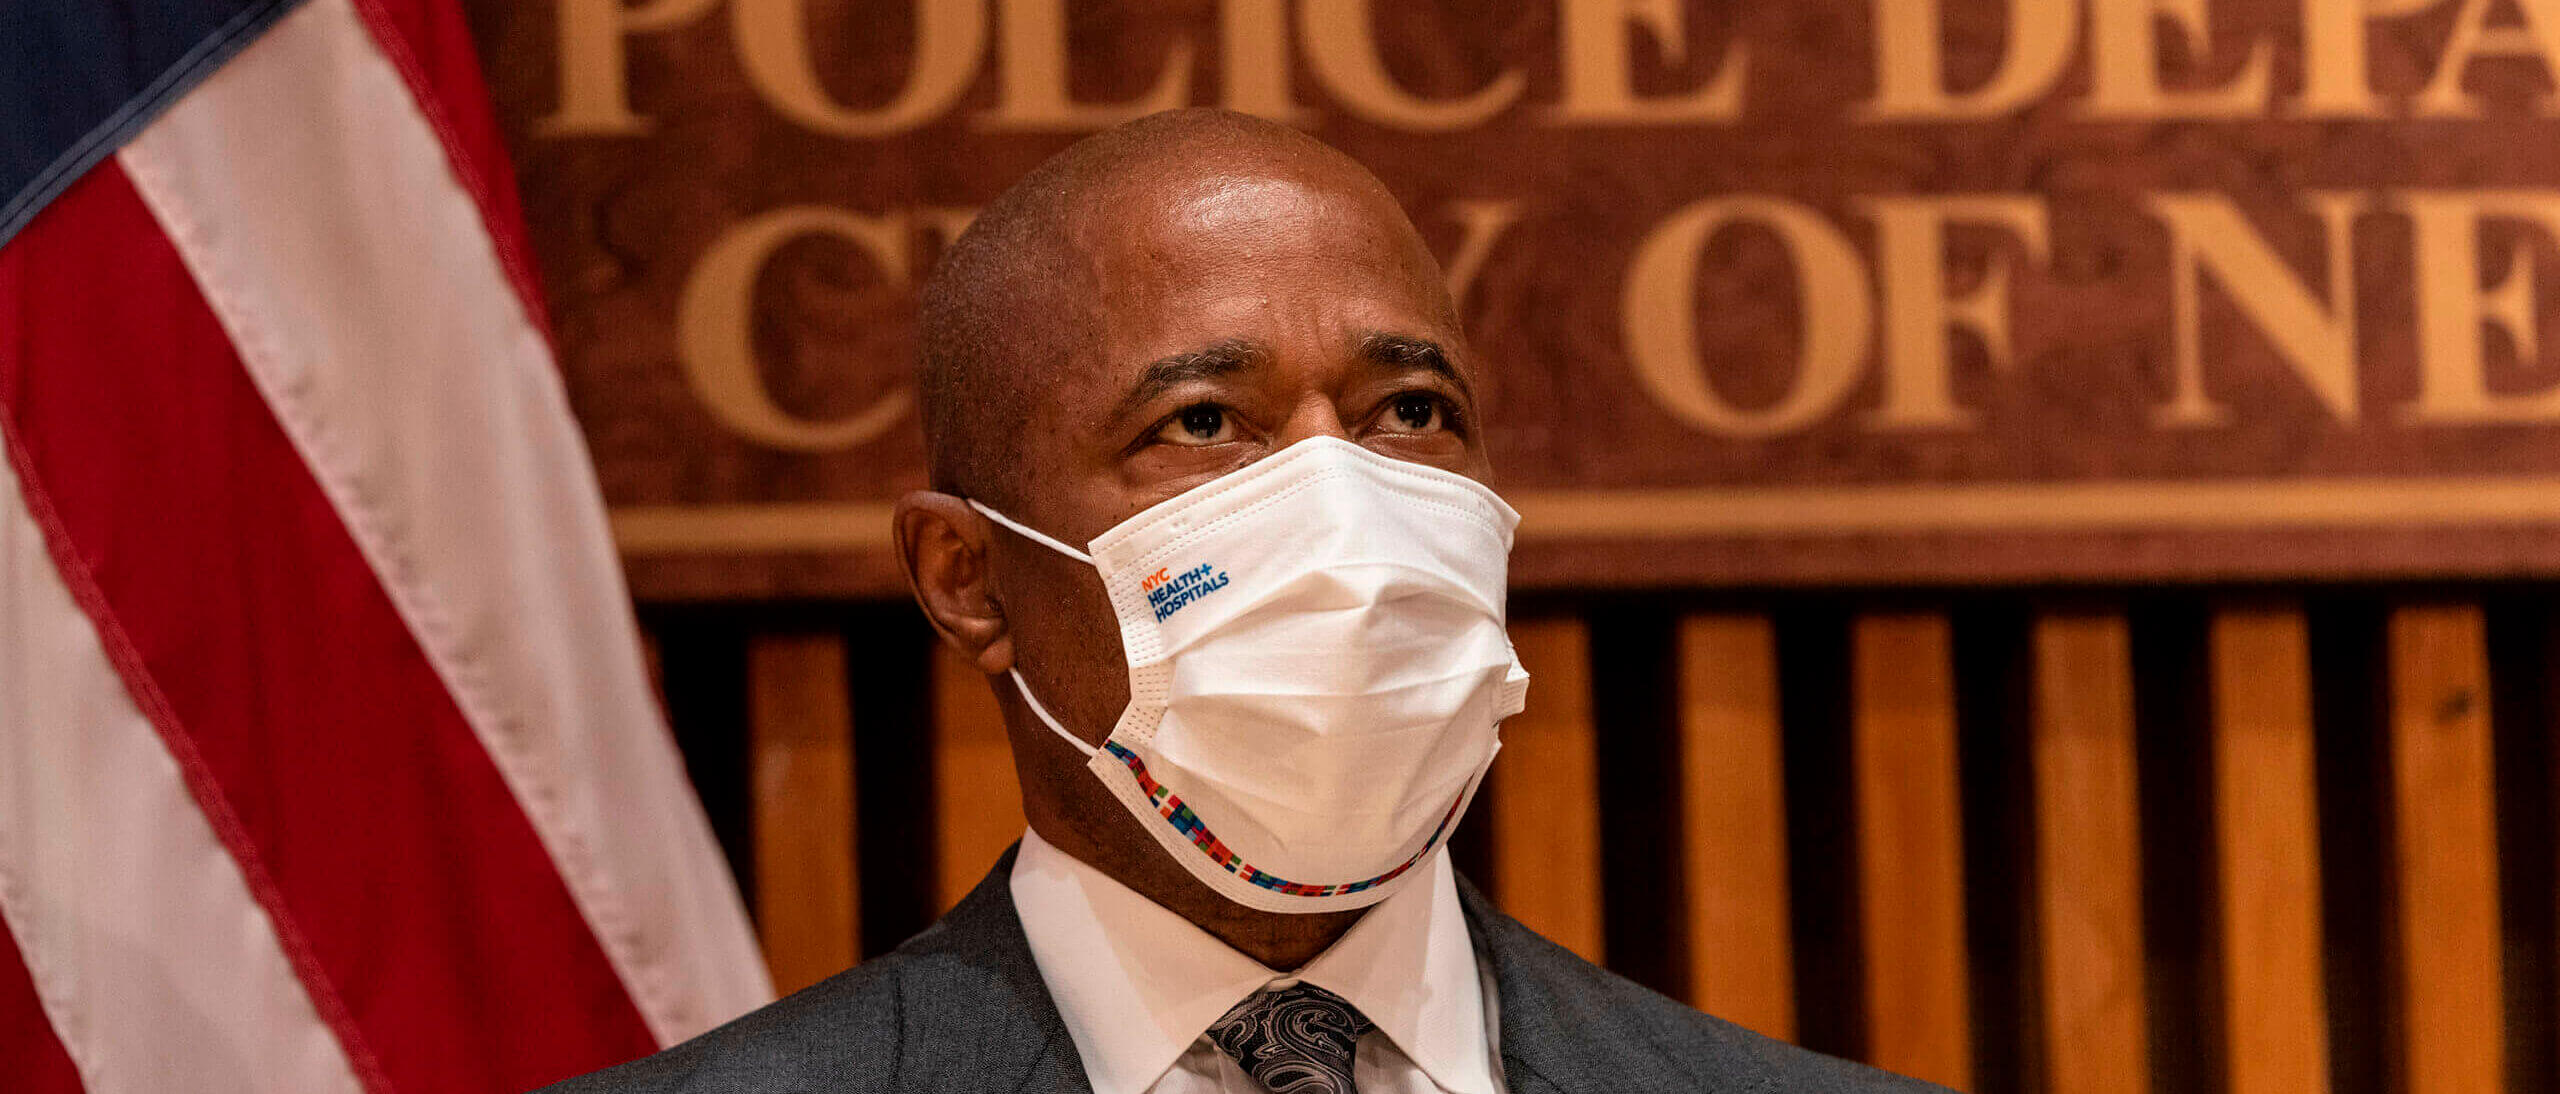 NYC Mayor Eric Adams Advises City Businesses to Require Patrons to Take off Masks Before Entering Their Stores › American Greatness